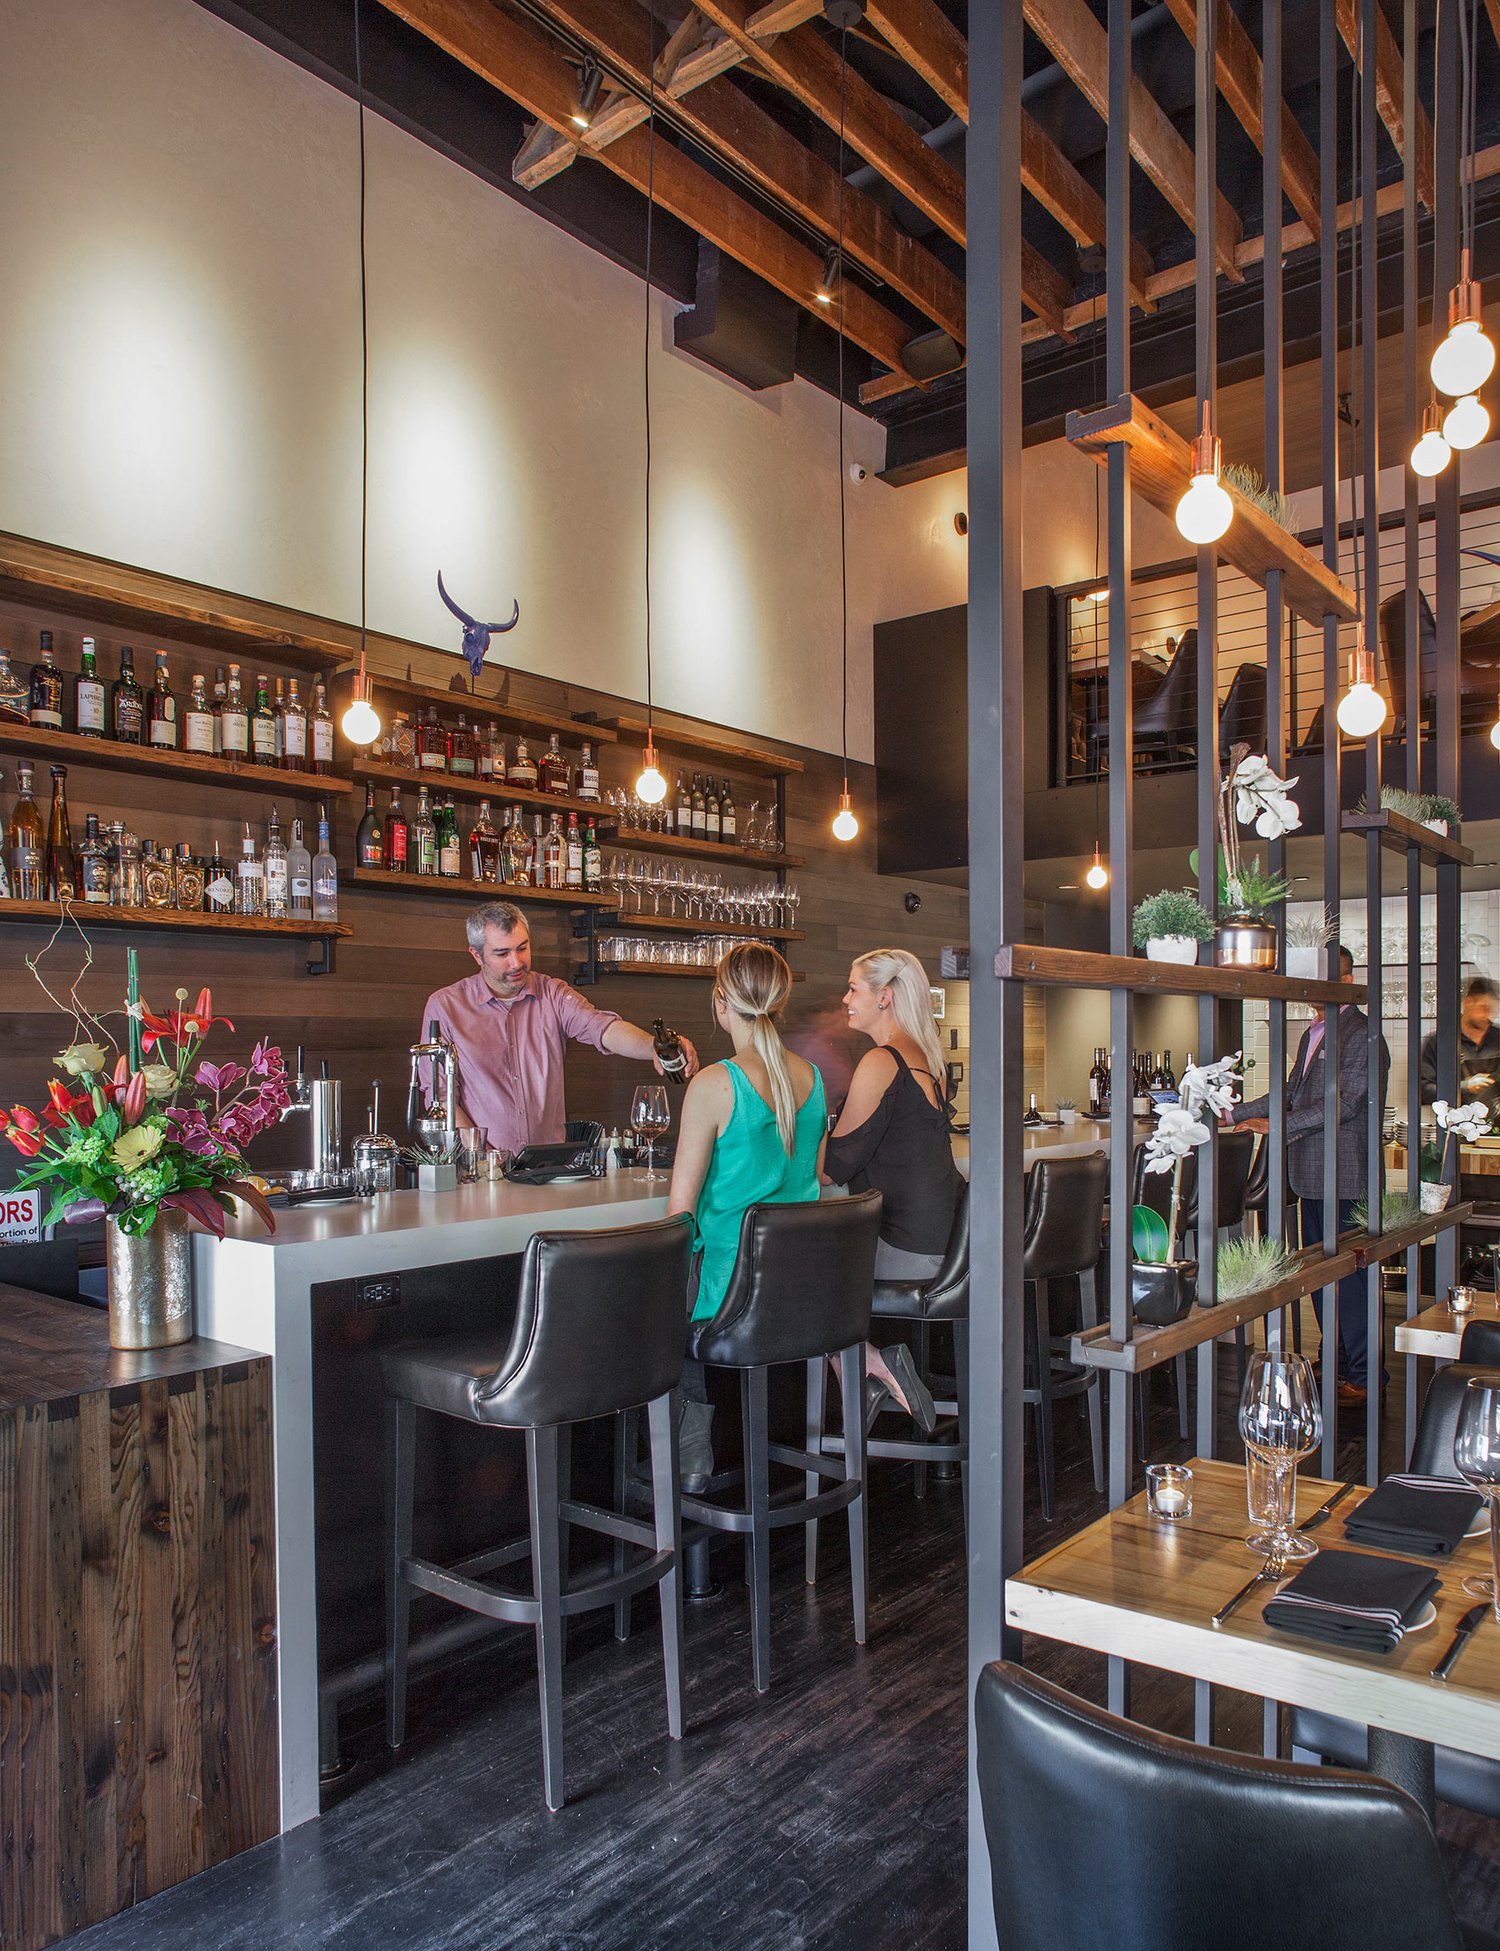 Bos Taurus | Hospitality Architecture, Restaurant in Bend Oregon ...